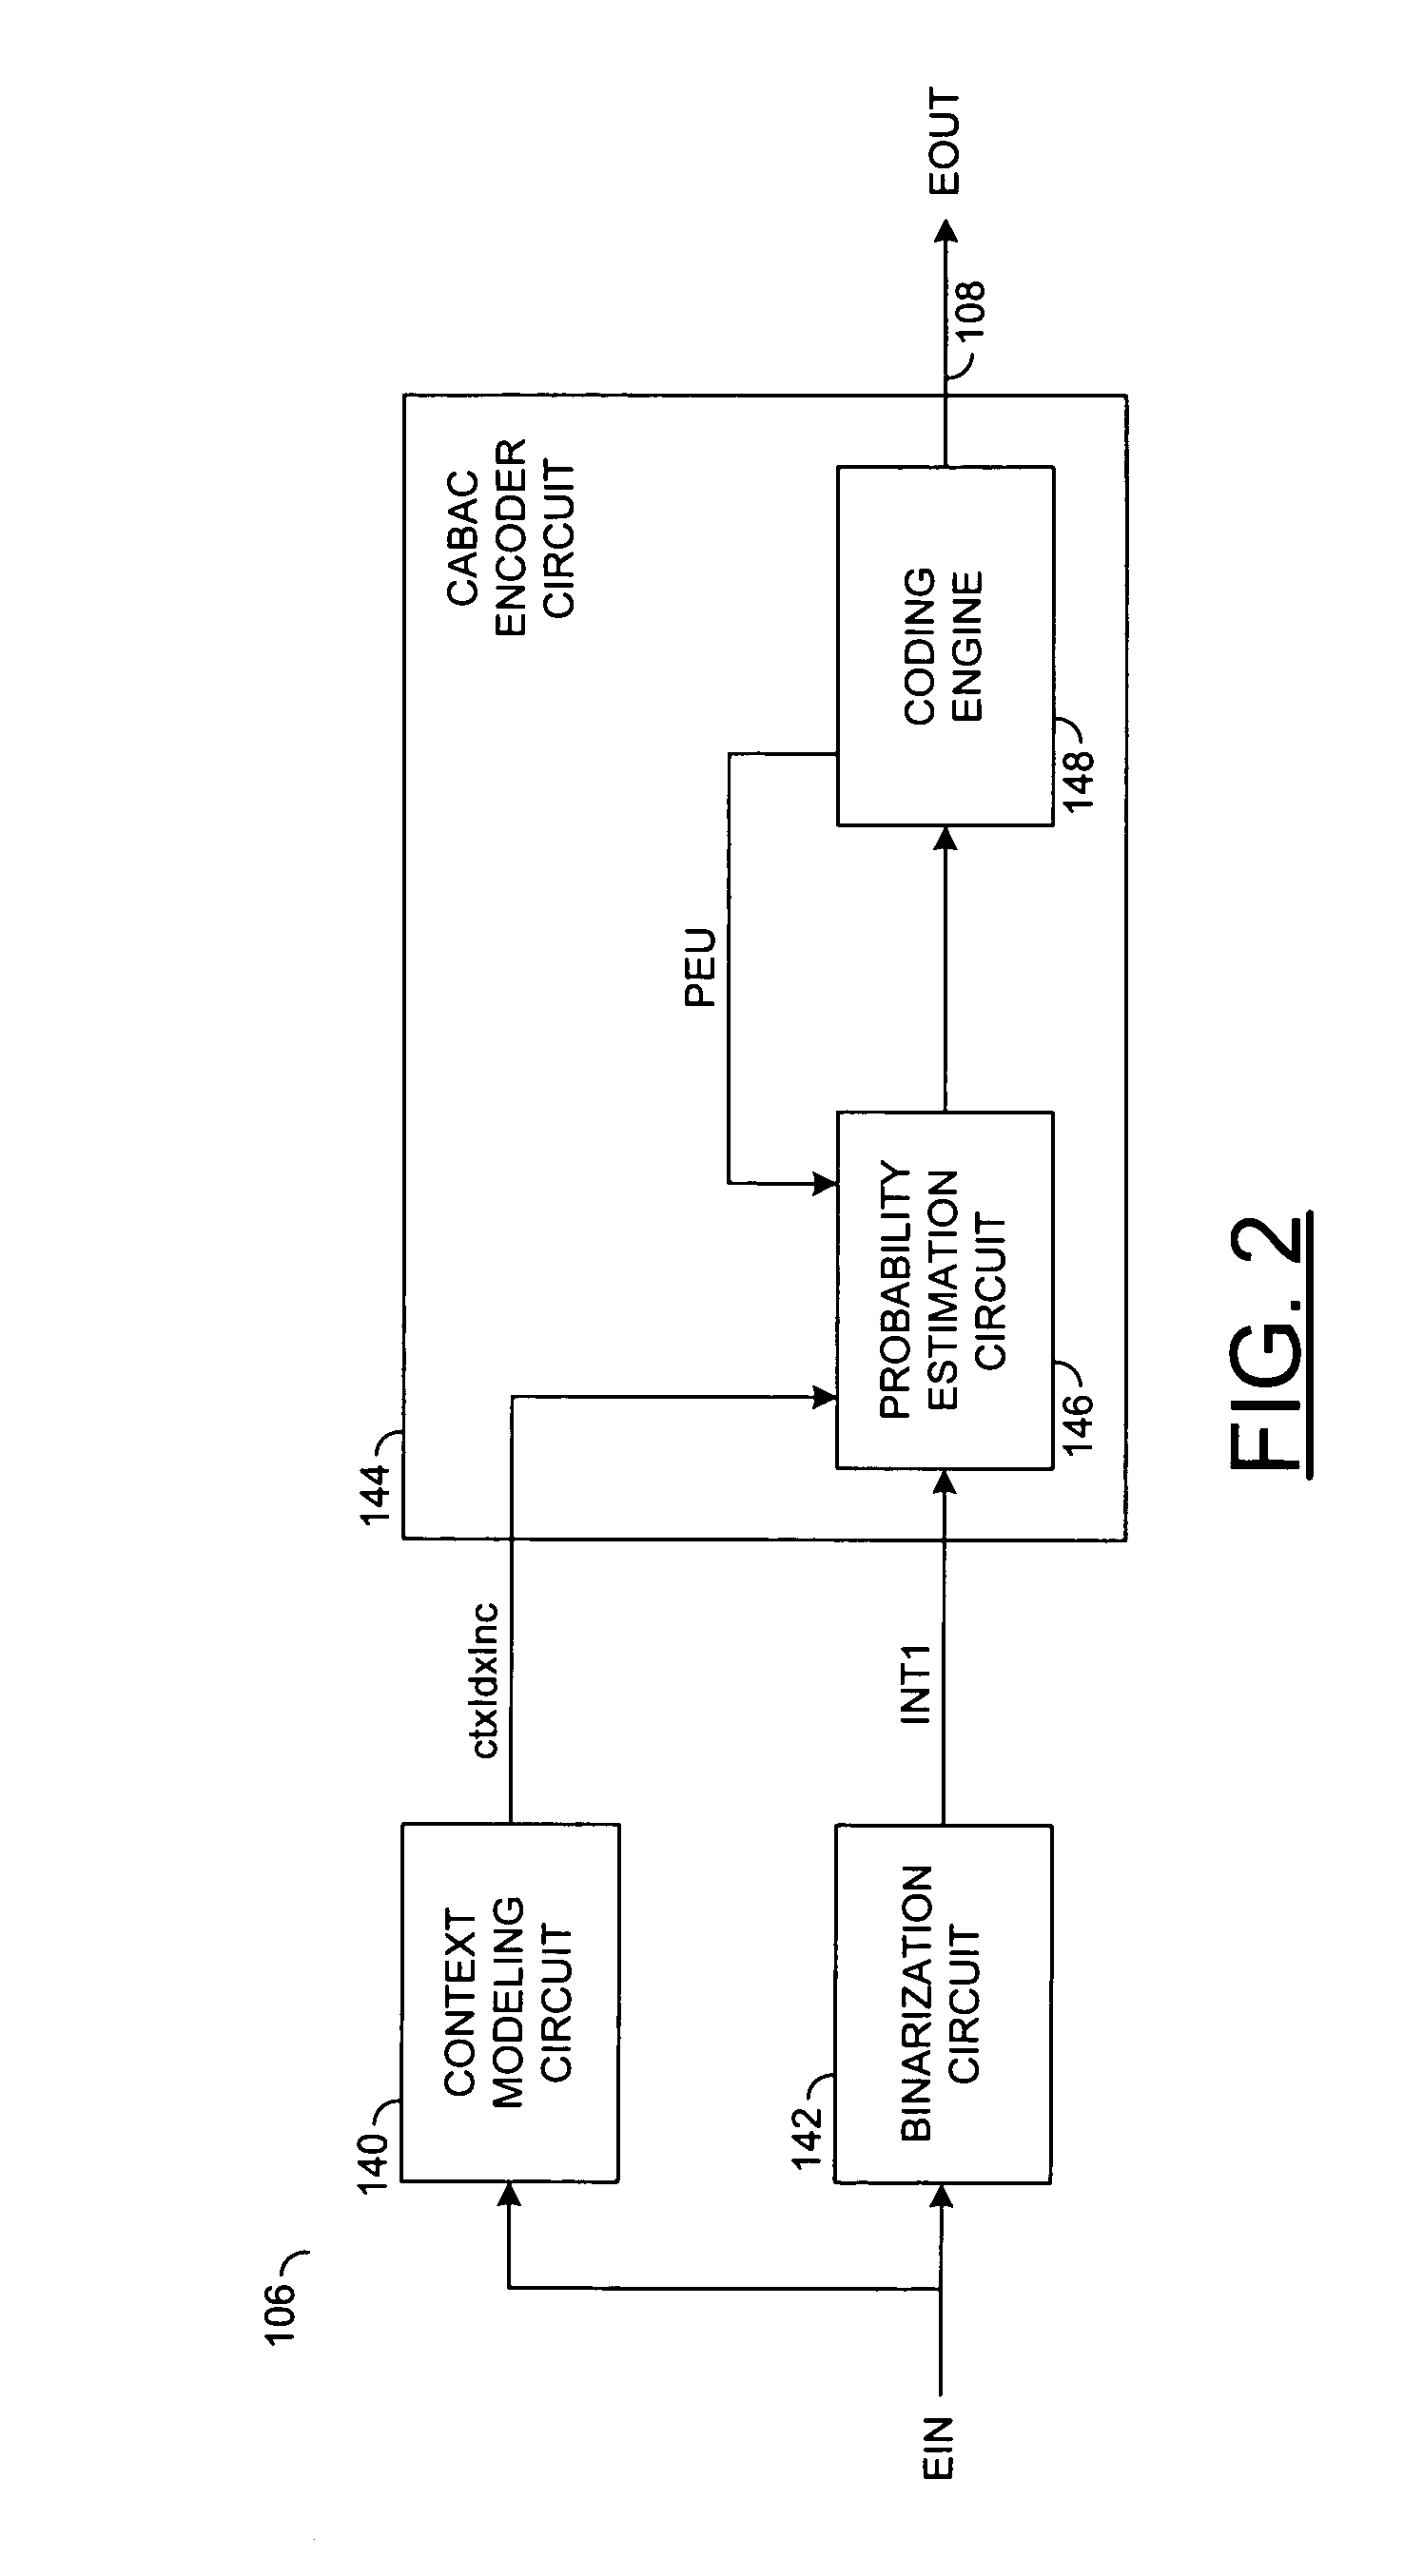 Method for selection of contexts for arithmetic coding of reference picture and motion vector residual bitstream syntax elements